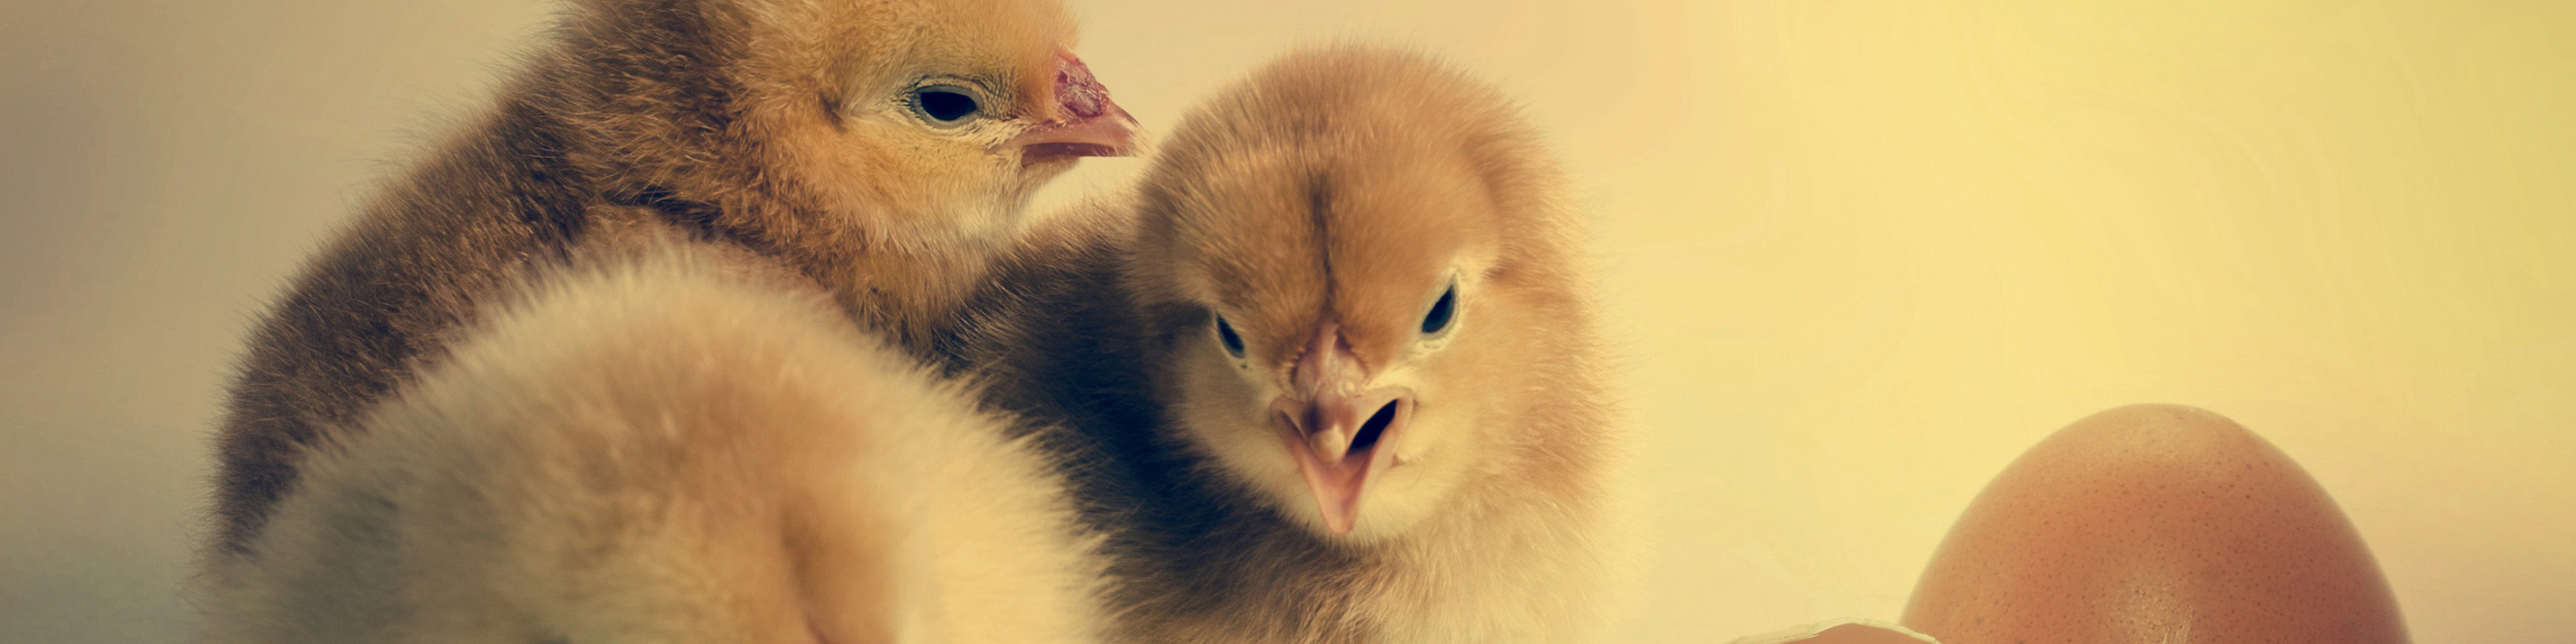 Which came first: the chicken or the egg? - Curious